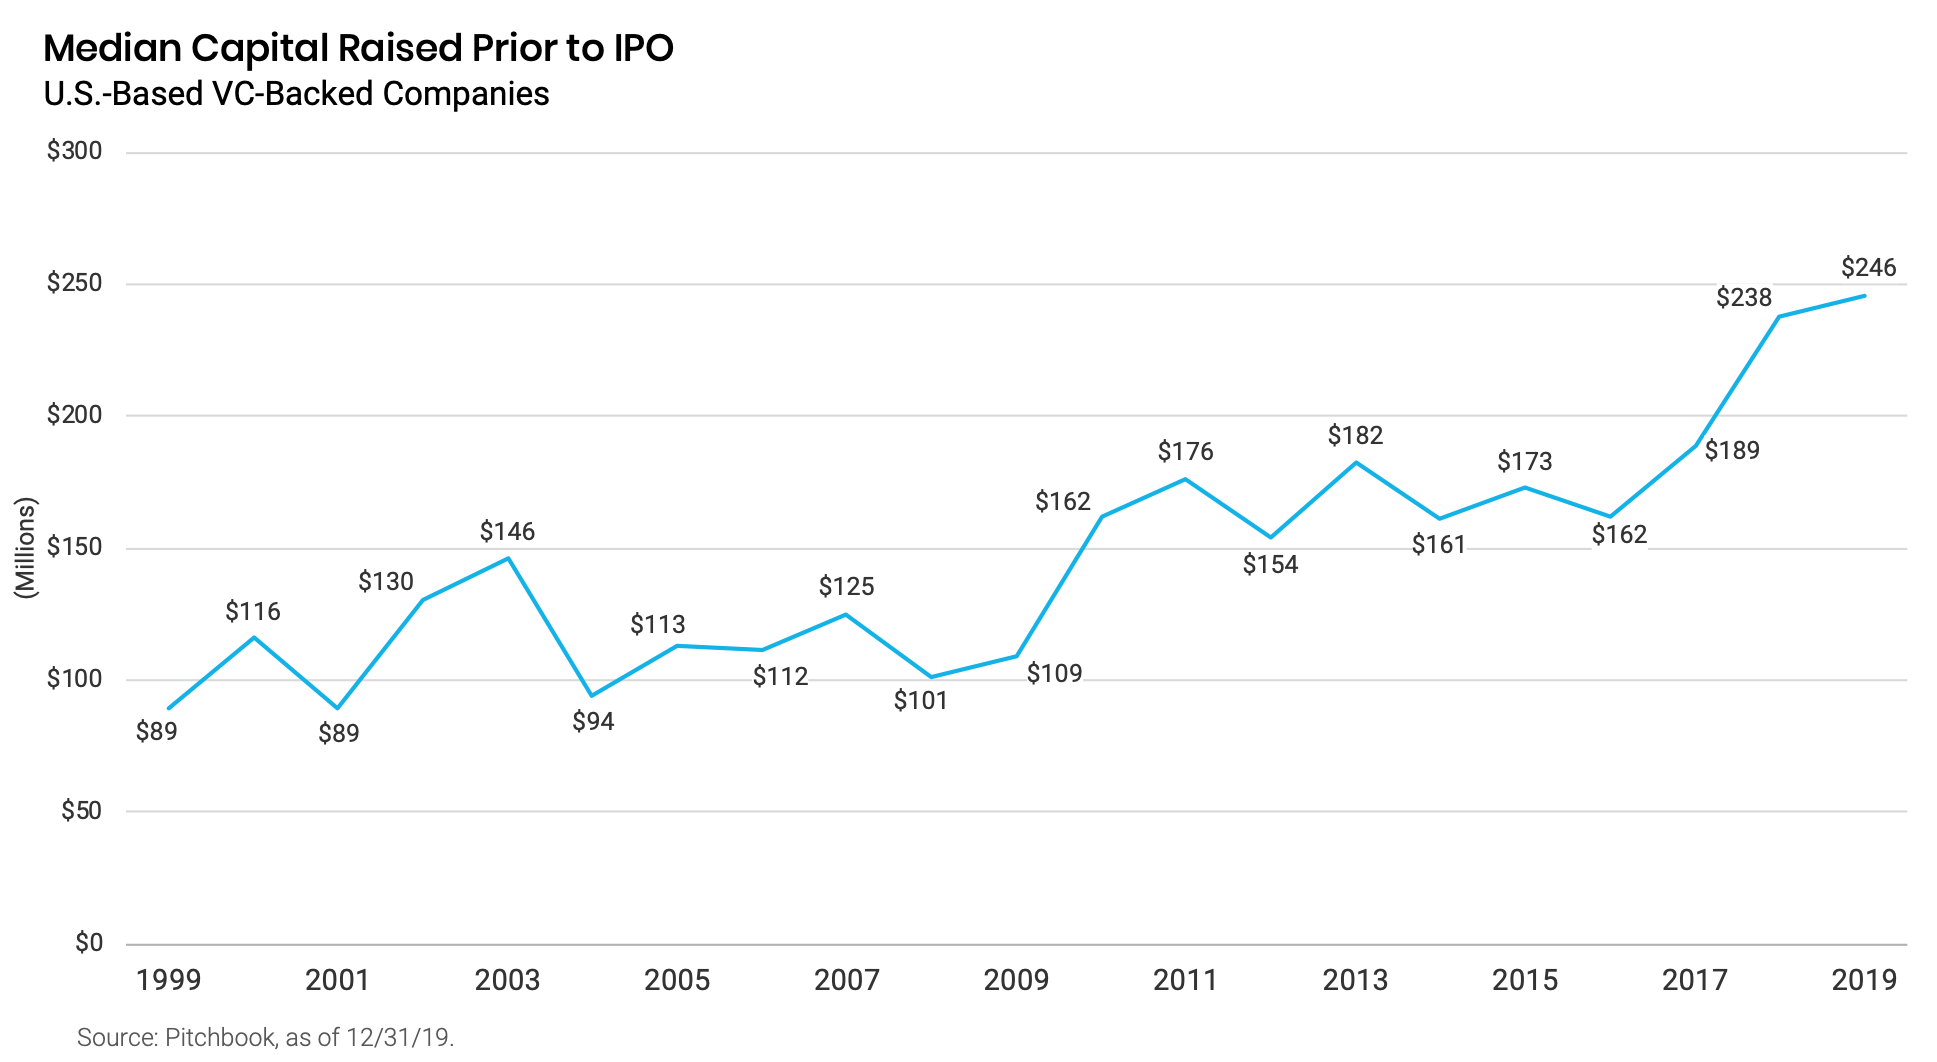 Median Capital Raised Prior to IPO